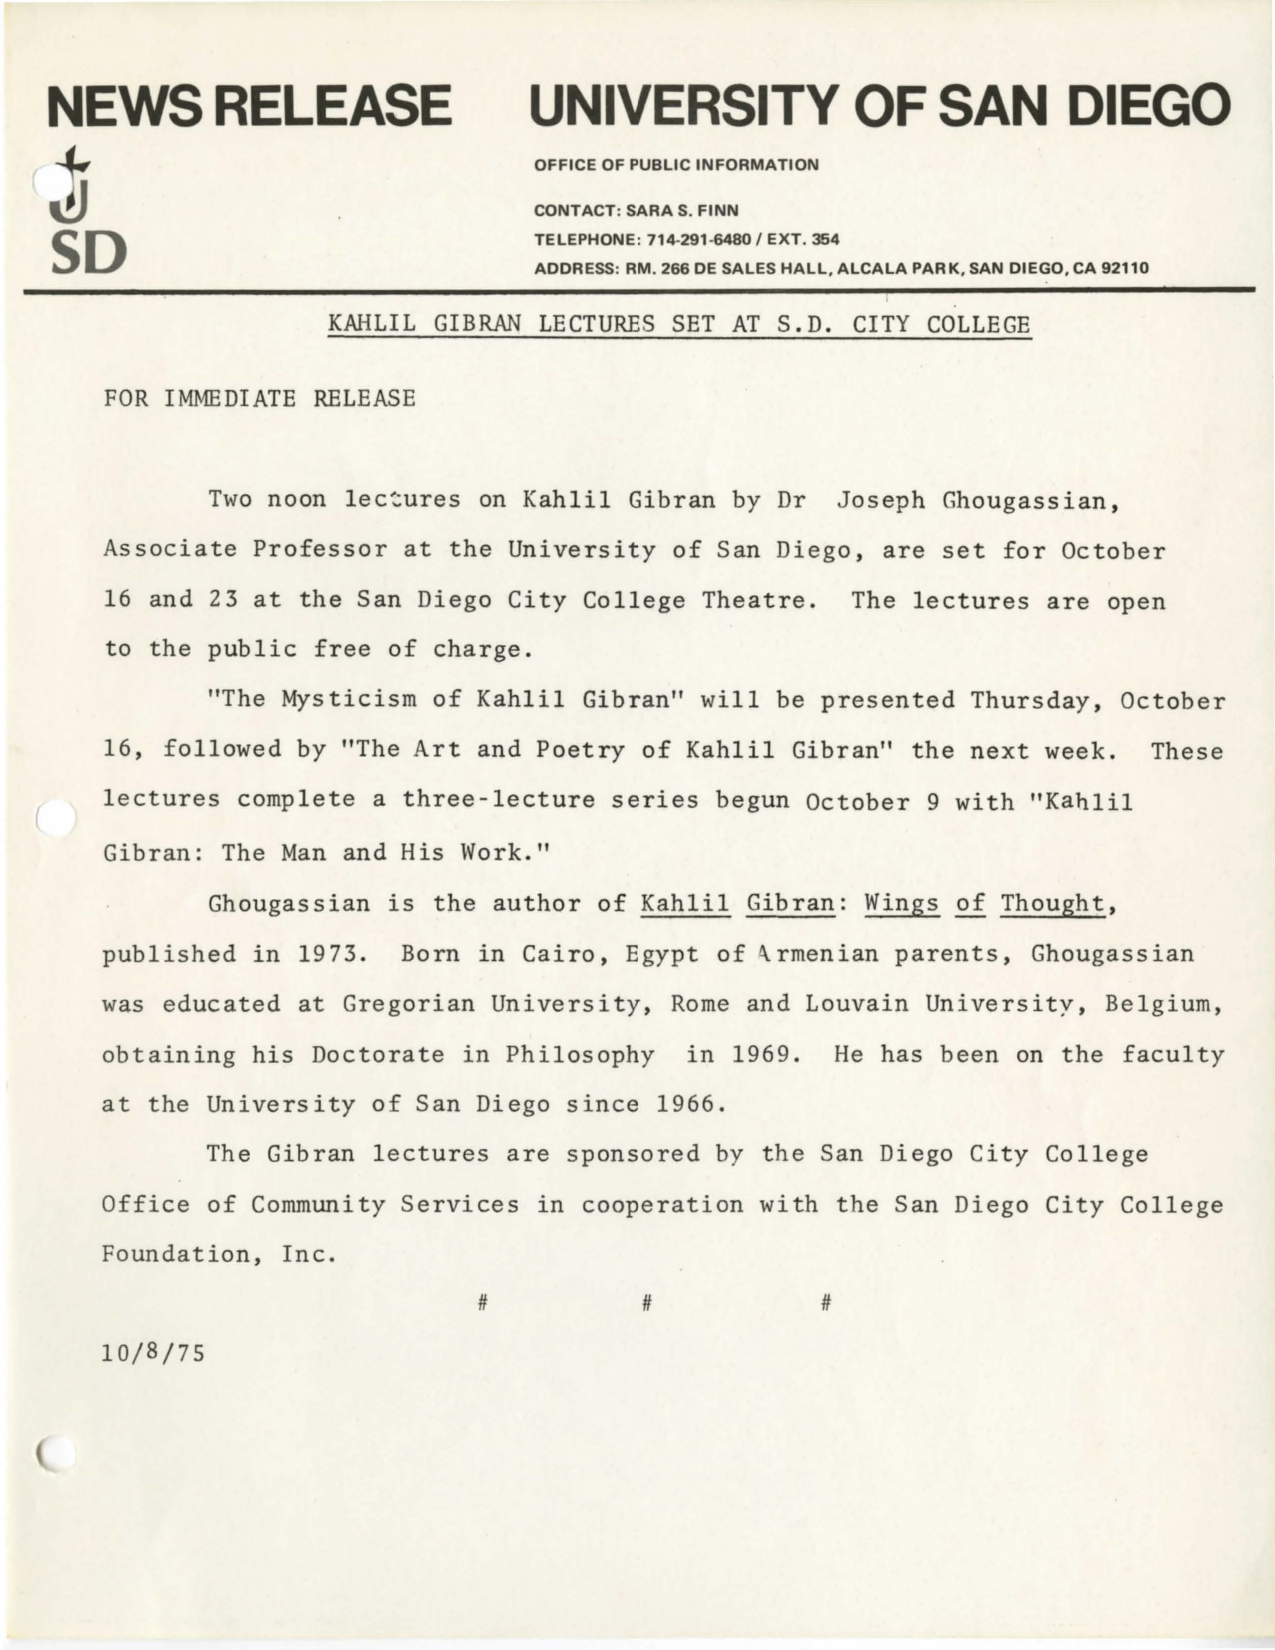 Kahlil Gibran Lectures by Joseph Ghougassian Set at S.D. (10/8/1975), USD News, News Releases - University of San Diego, City College Office of Public Information